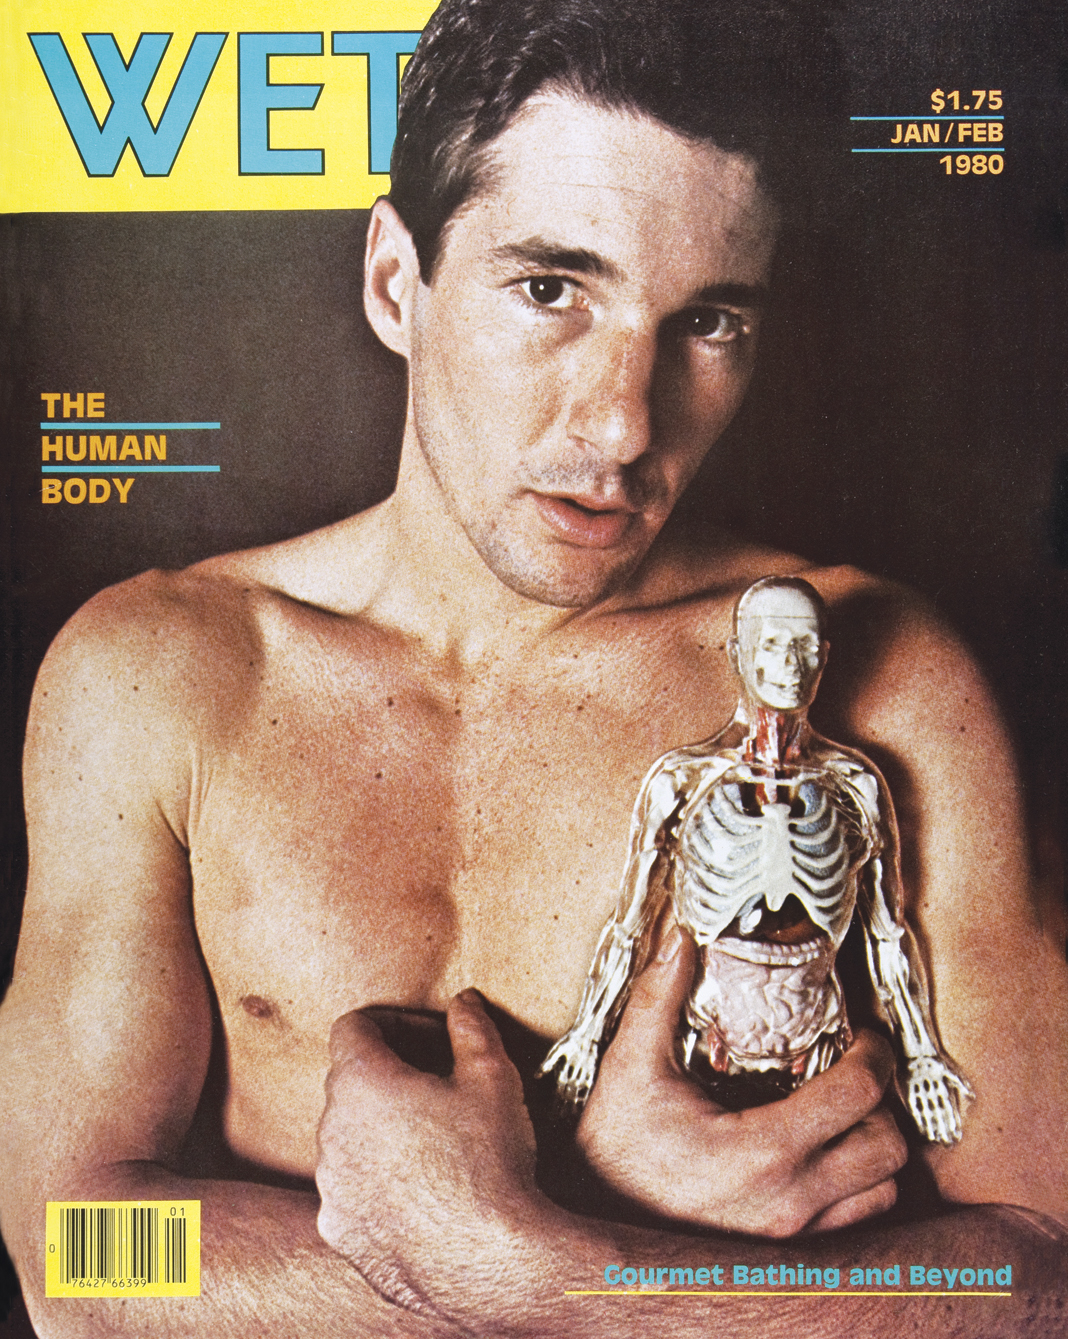 The Human Body cover of WET magazine, featuring a topless male holding a small sized human skeleton replica.